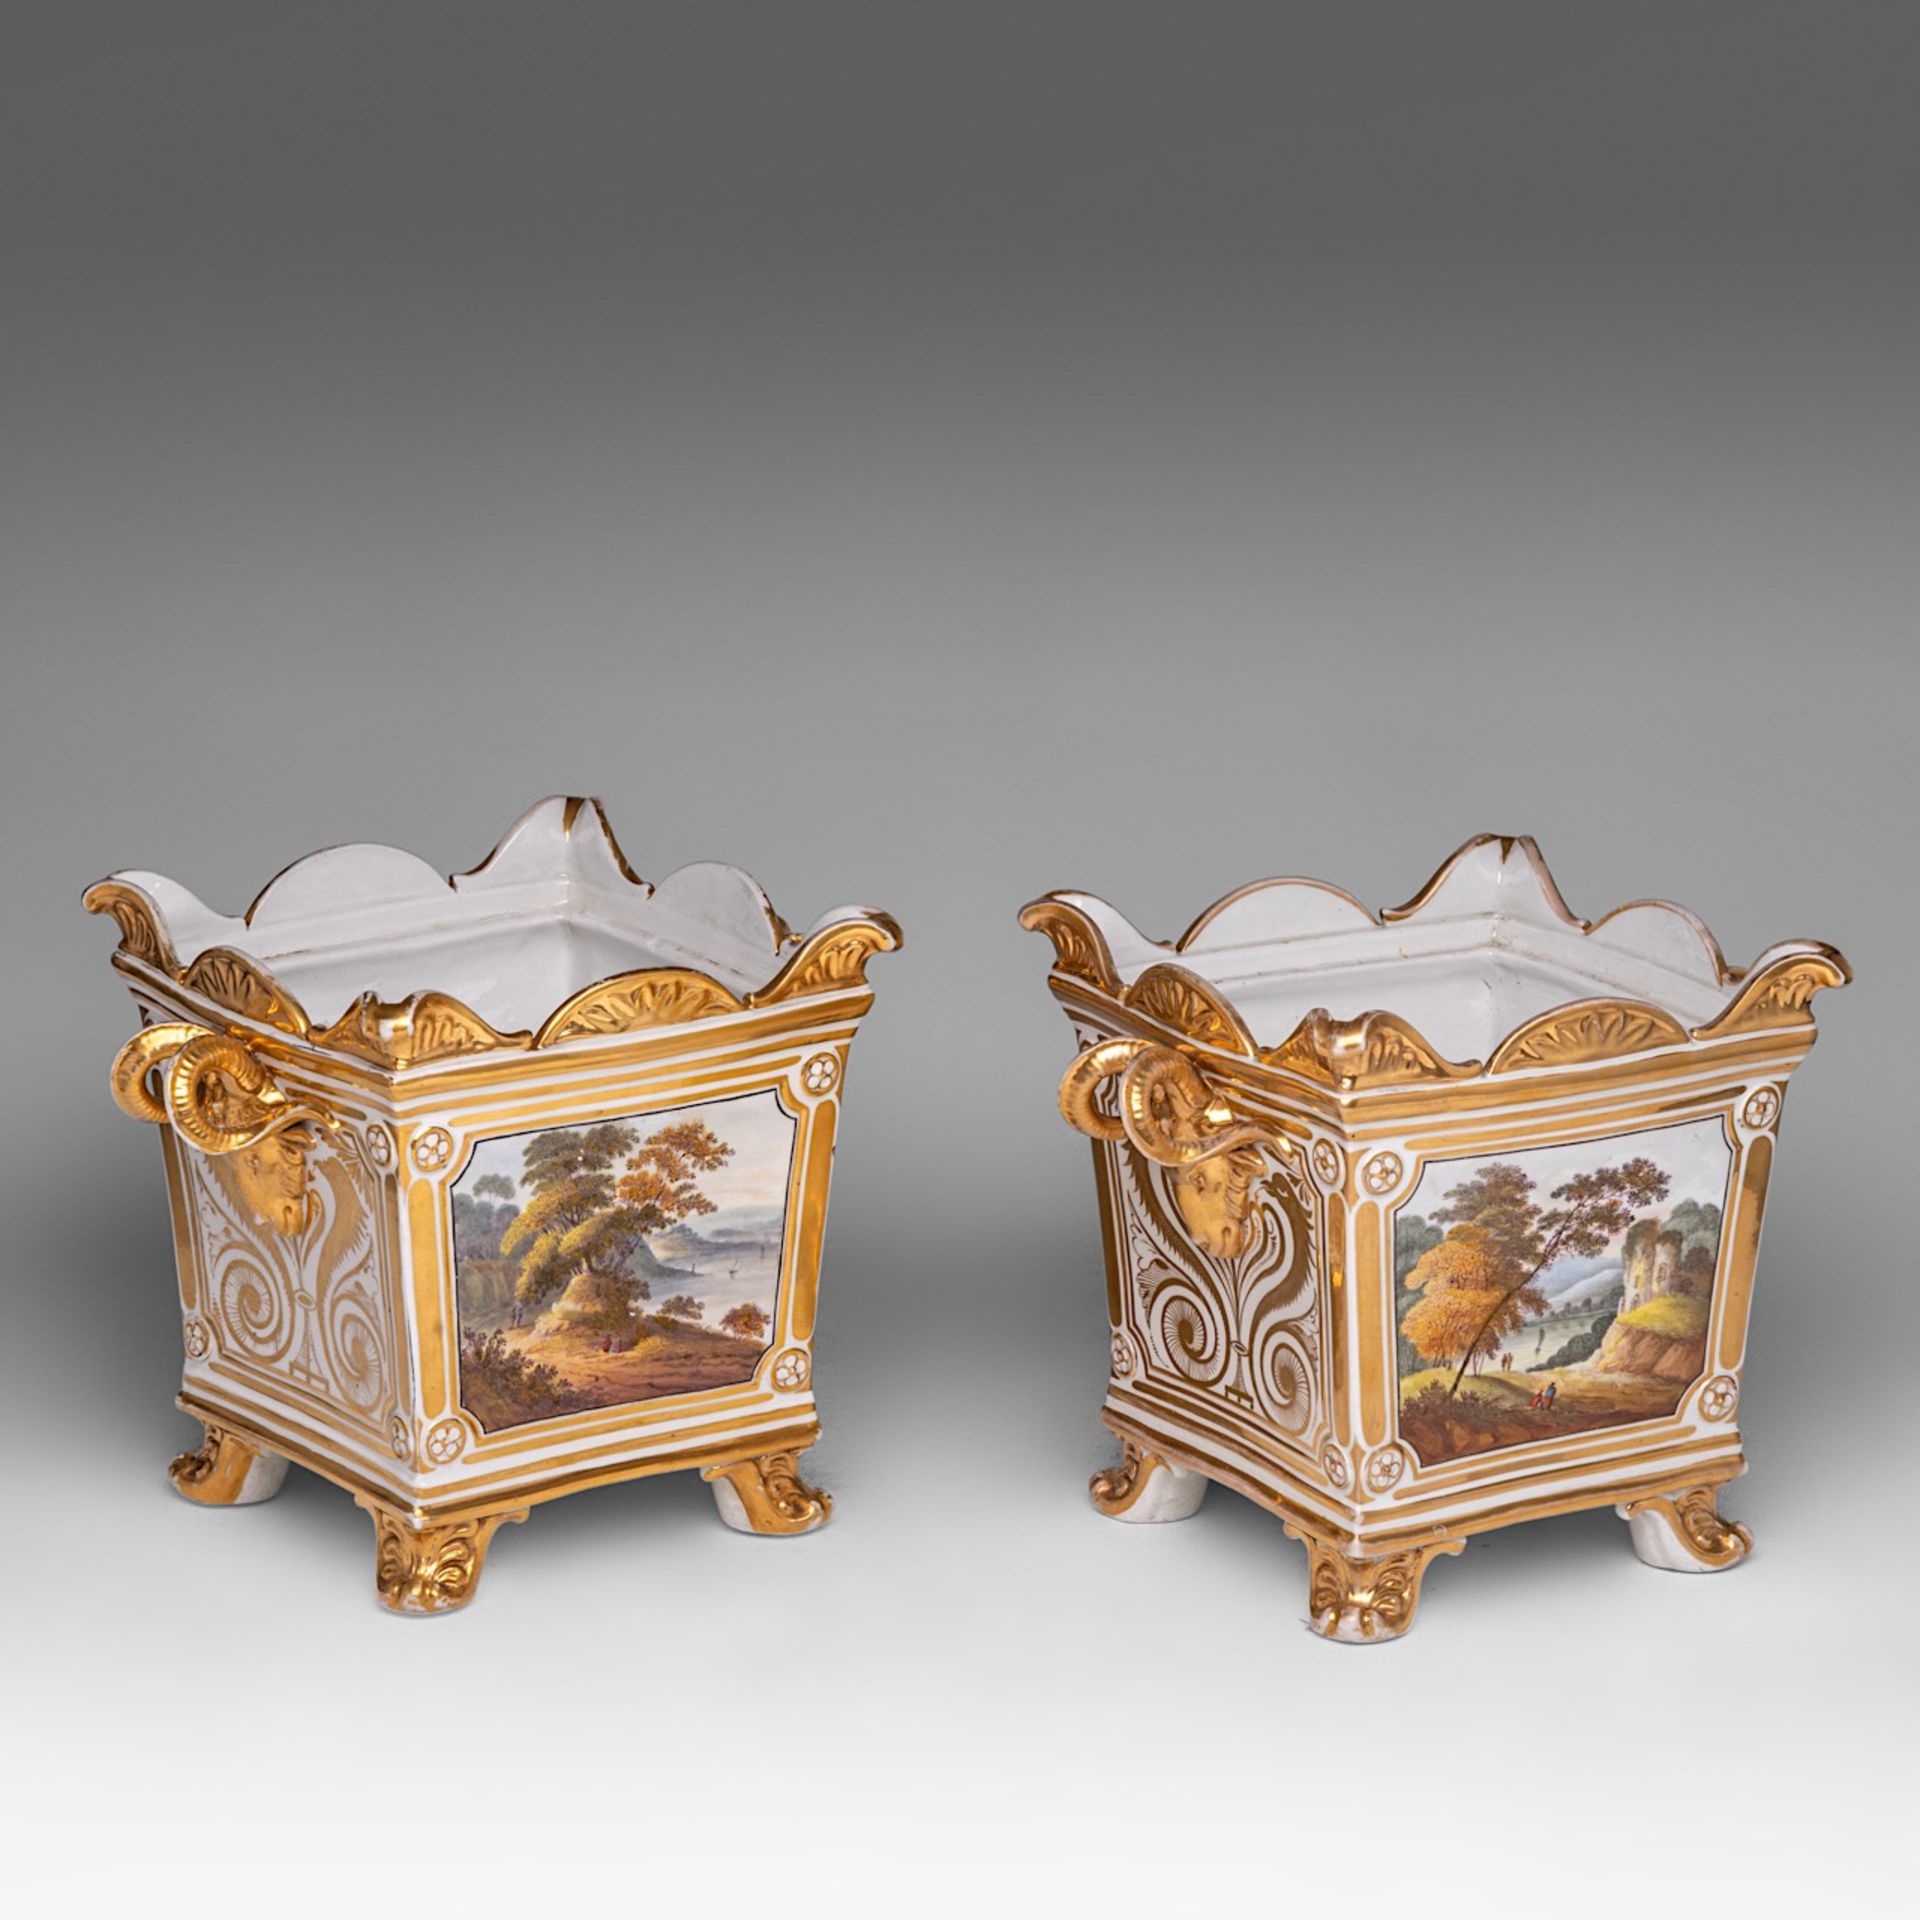 A pair of hand-painted and gilt-decorated porcelain jardinieres with landscapes and flowers, 19thC,